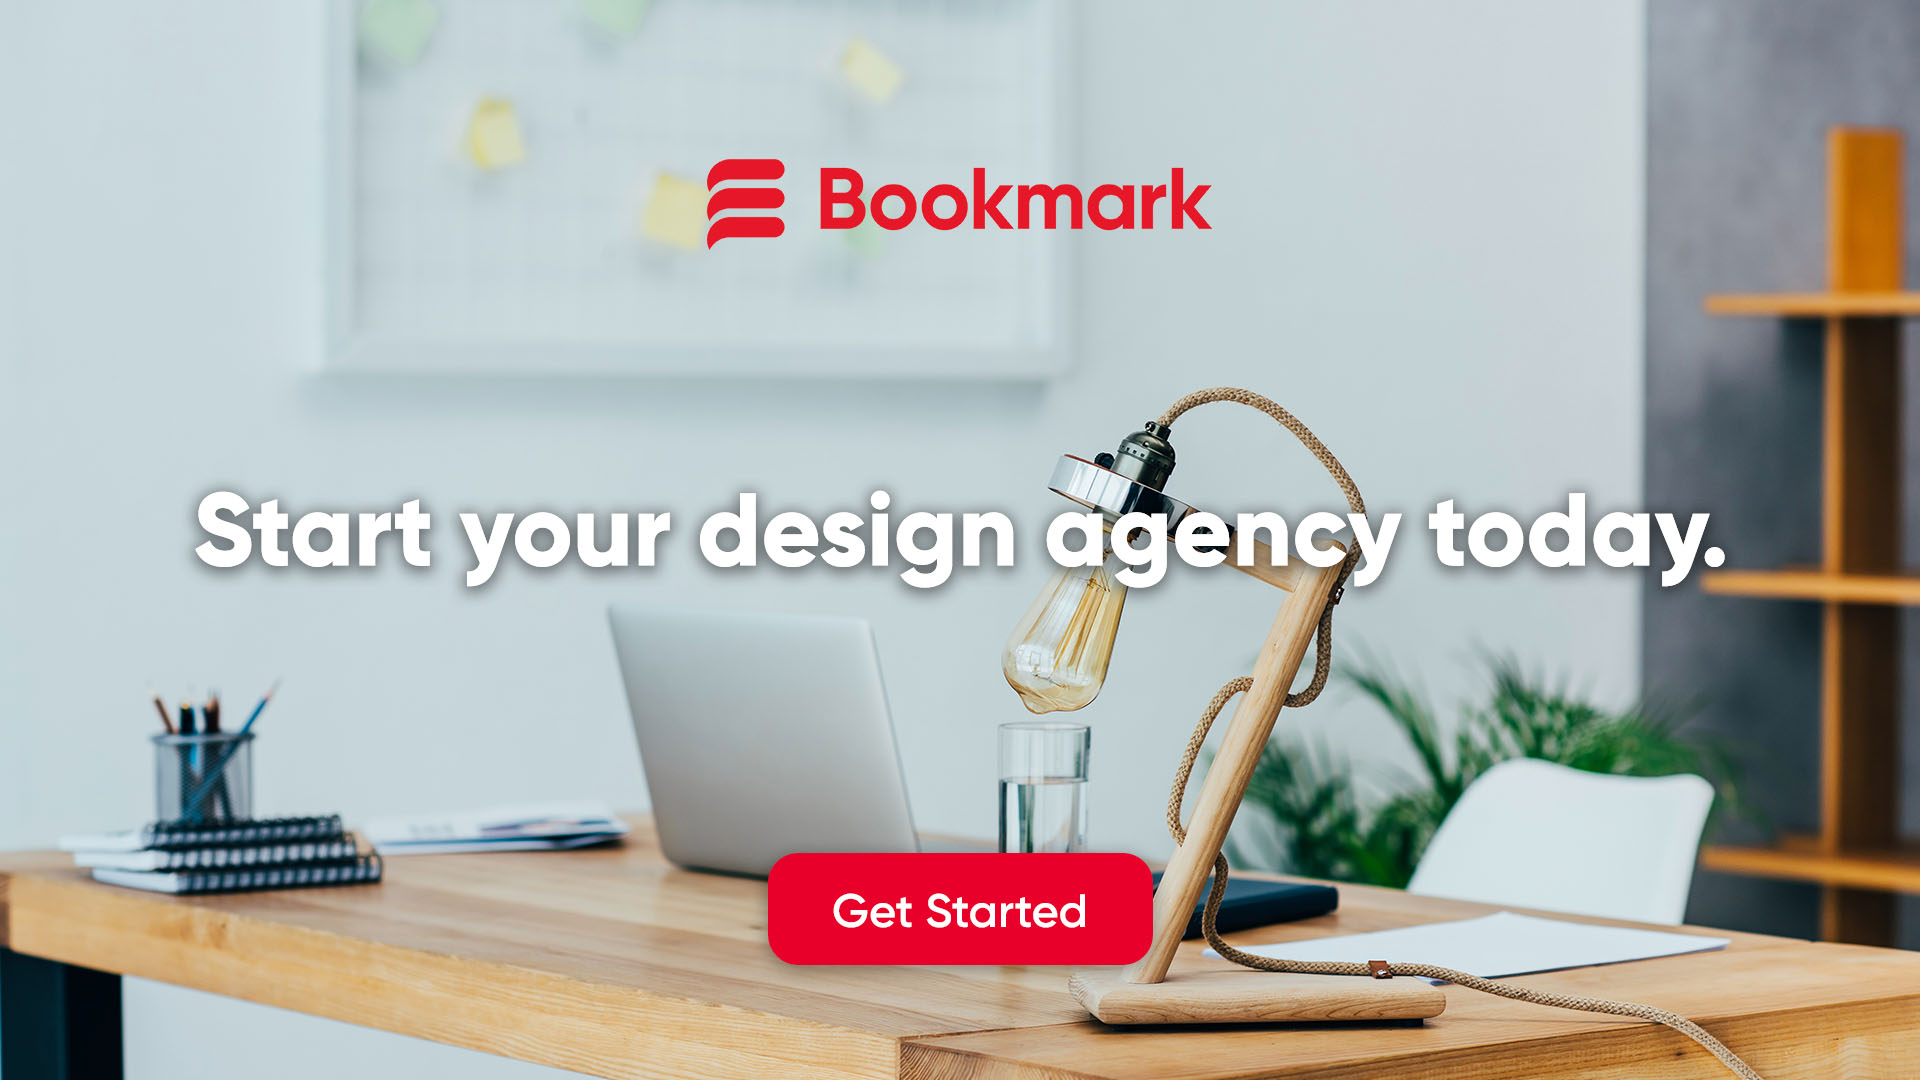 design agency, make extra cash, make money from home, online classifieds, searching online classifieds, side gig, side hustle, side job, start a design agency, website design, work from home, work from home, web design agency, website design, agency solutions